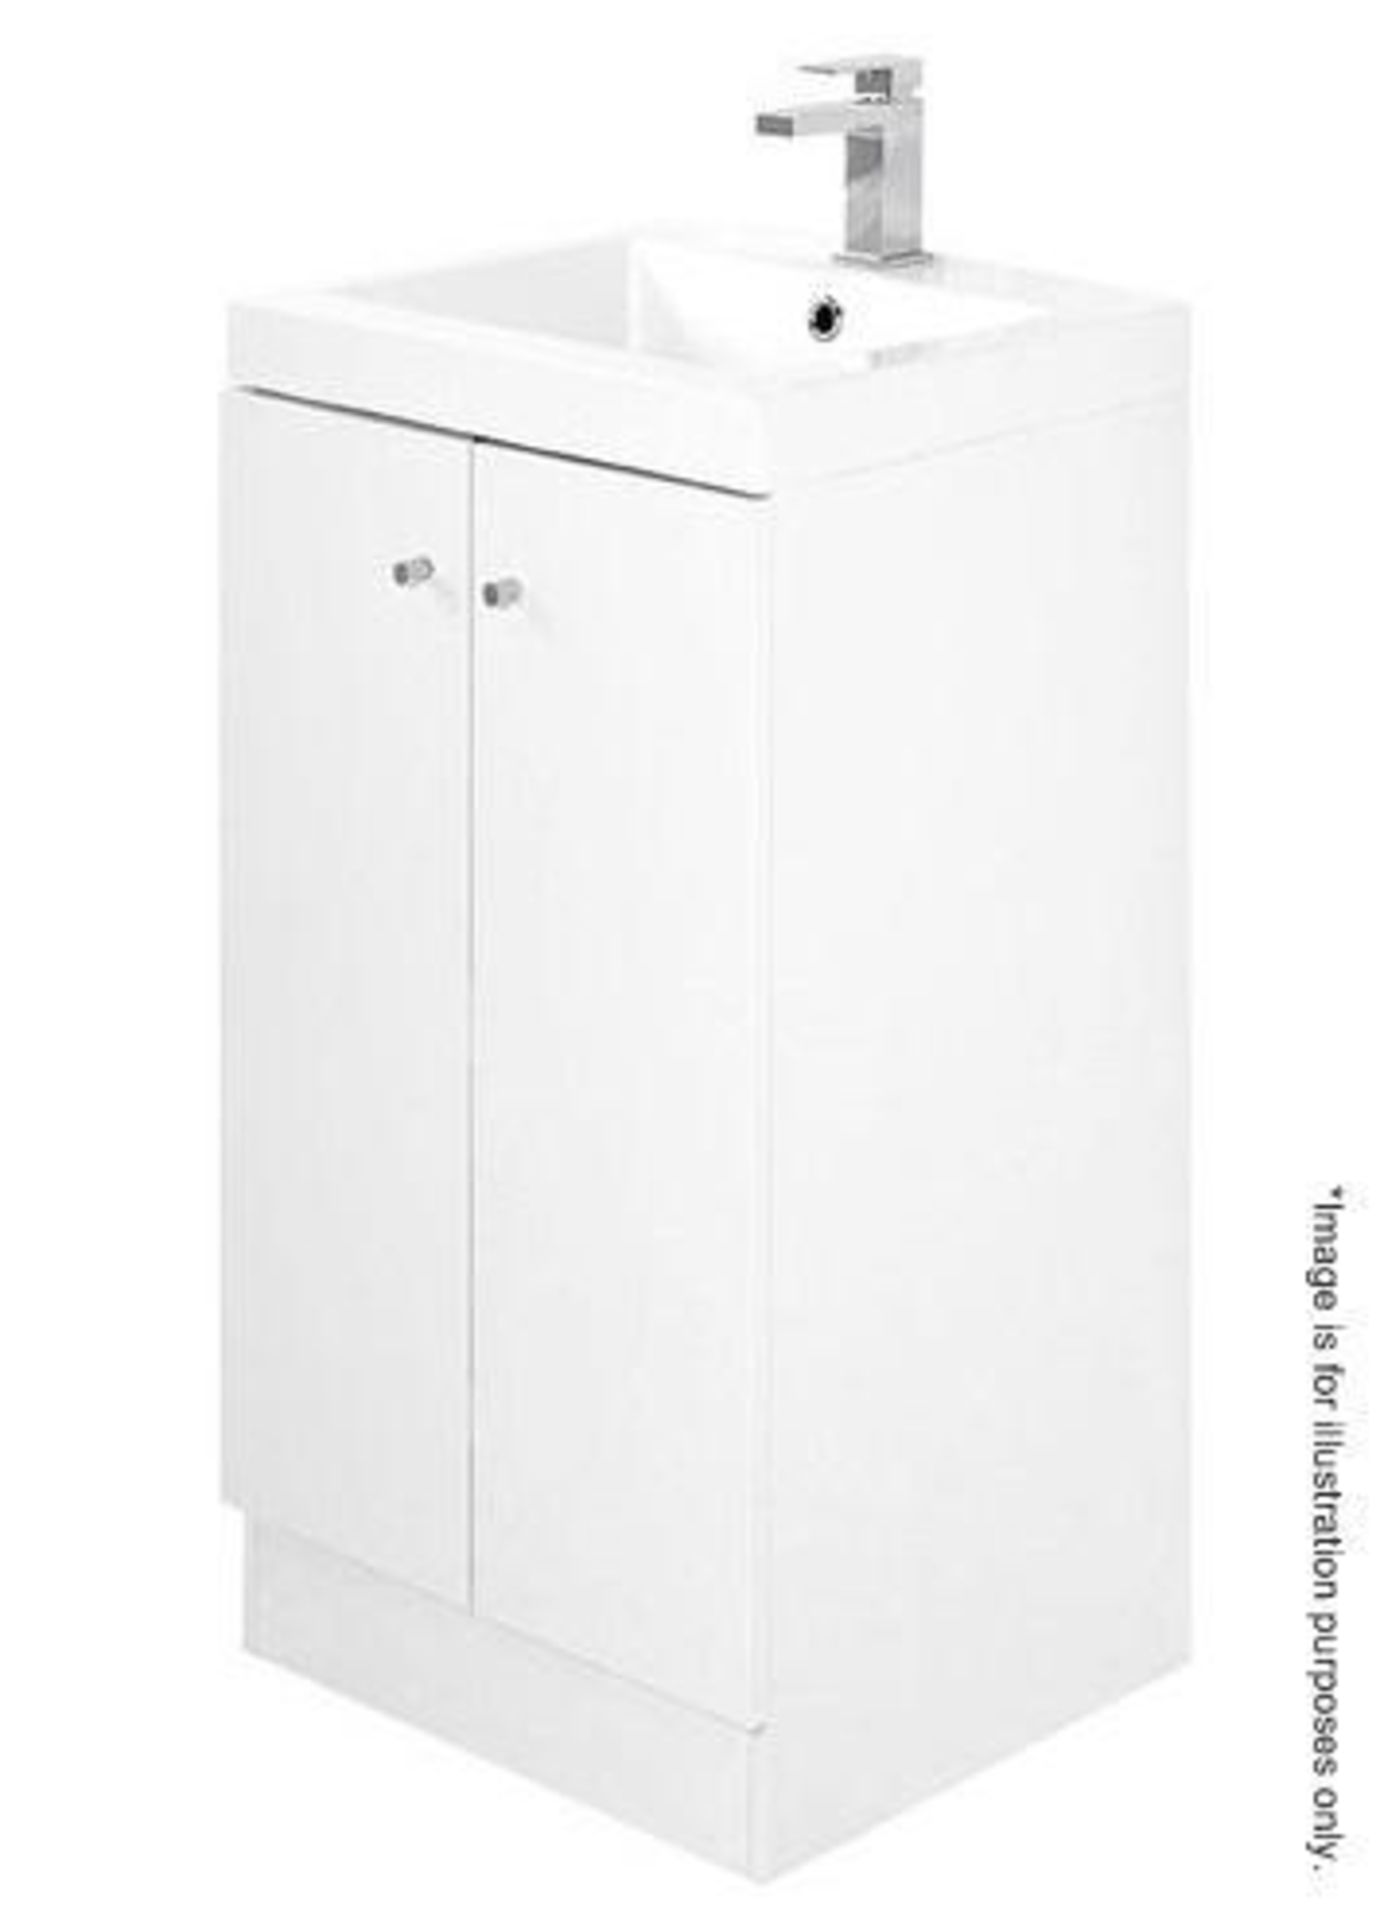 10 x Alpine Duo 400 Floorstanding Vanity Units In Gloss White - Brand New Boxed Stock - Dimensions: - Image 2 of 3